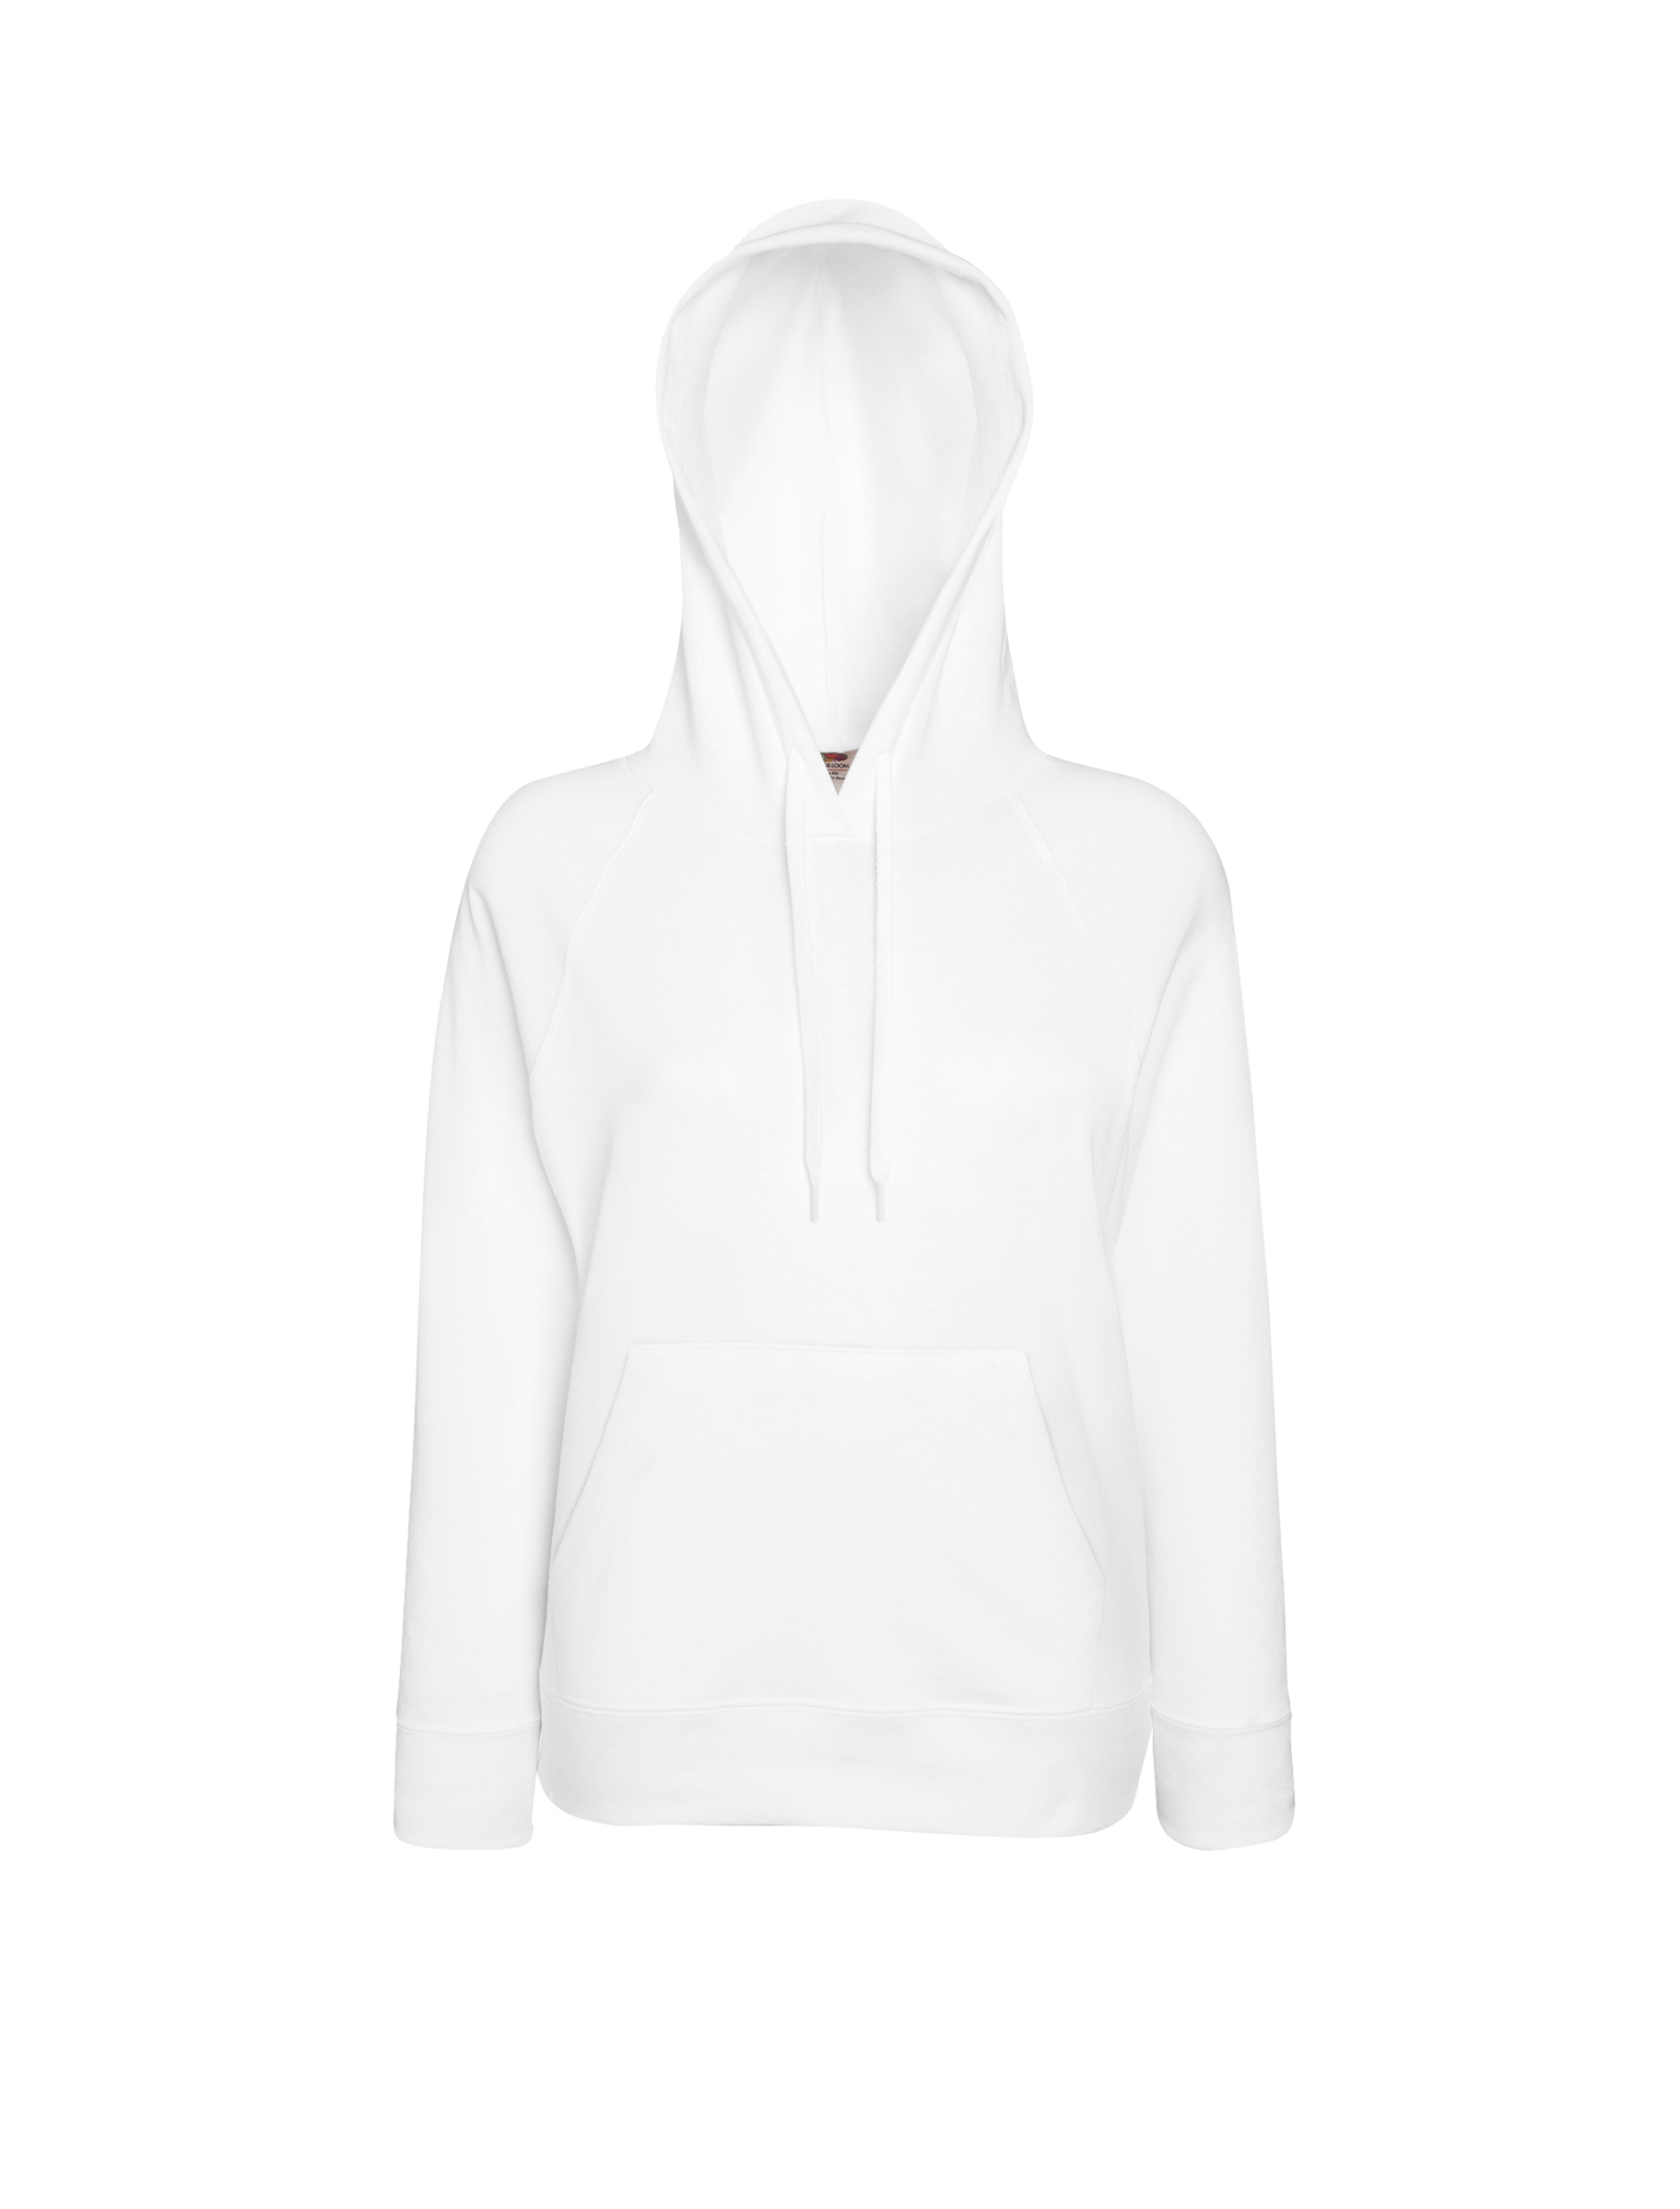 ax-httpswebsystems.s3.amazonaws.comtmp_for_downloadfruit-of-the-loom-womens-lightweight-hooded-sweatshirt-white.jpeg